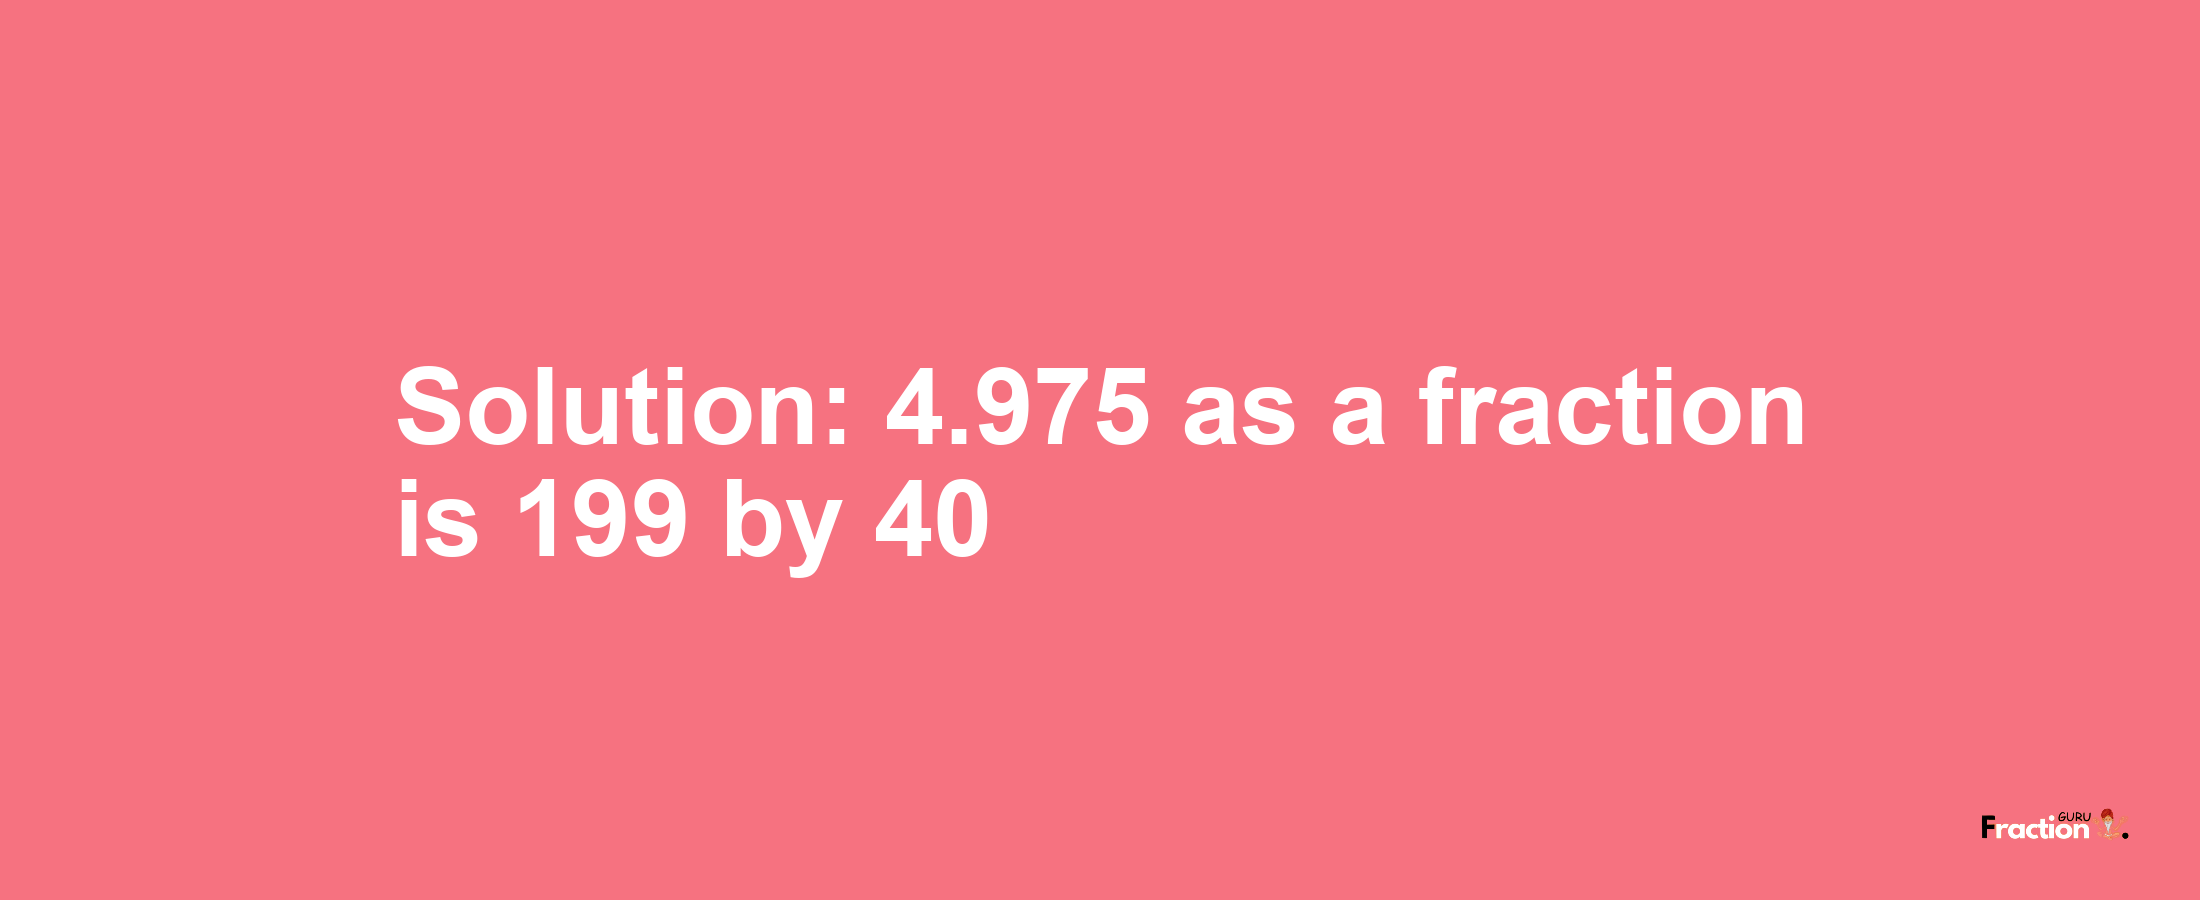 Solution:4.975 as a fraction is 199/40